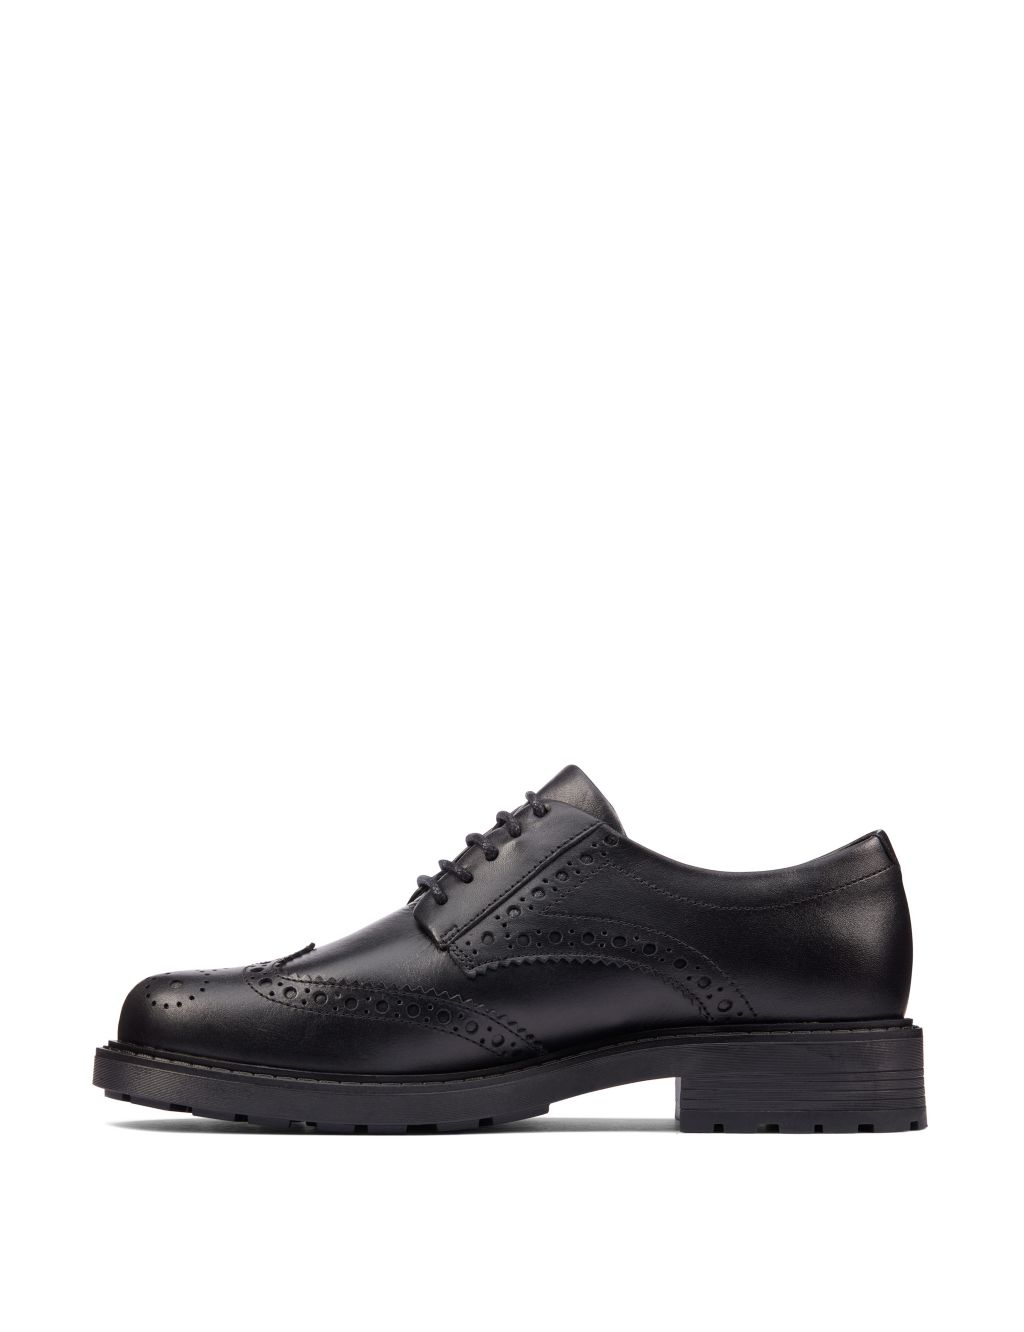 Leather Lace Up Brogues image 5